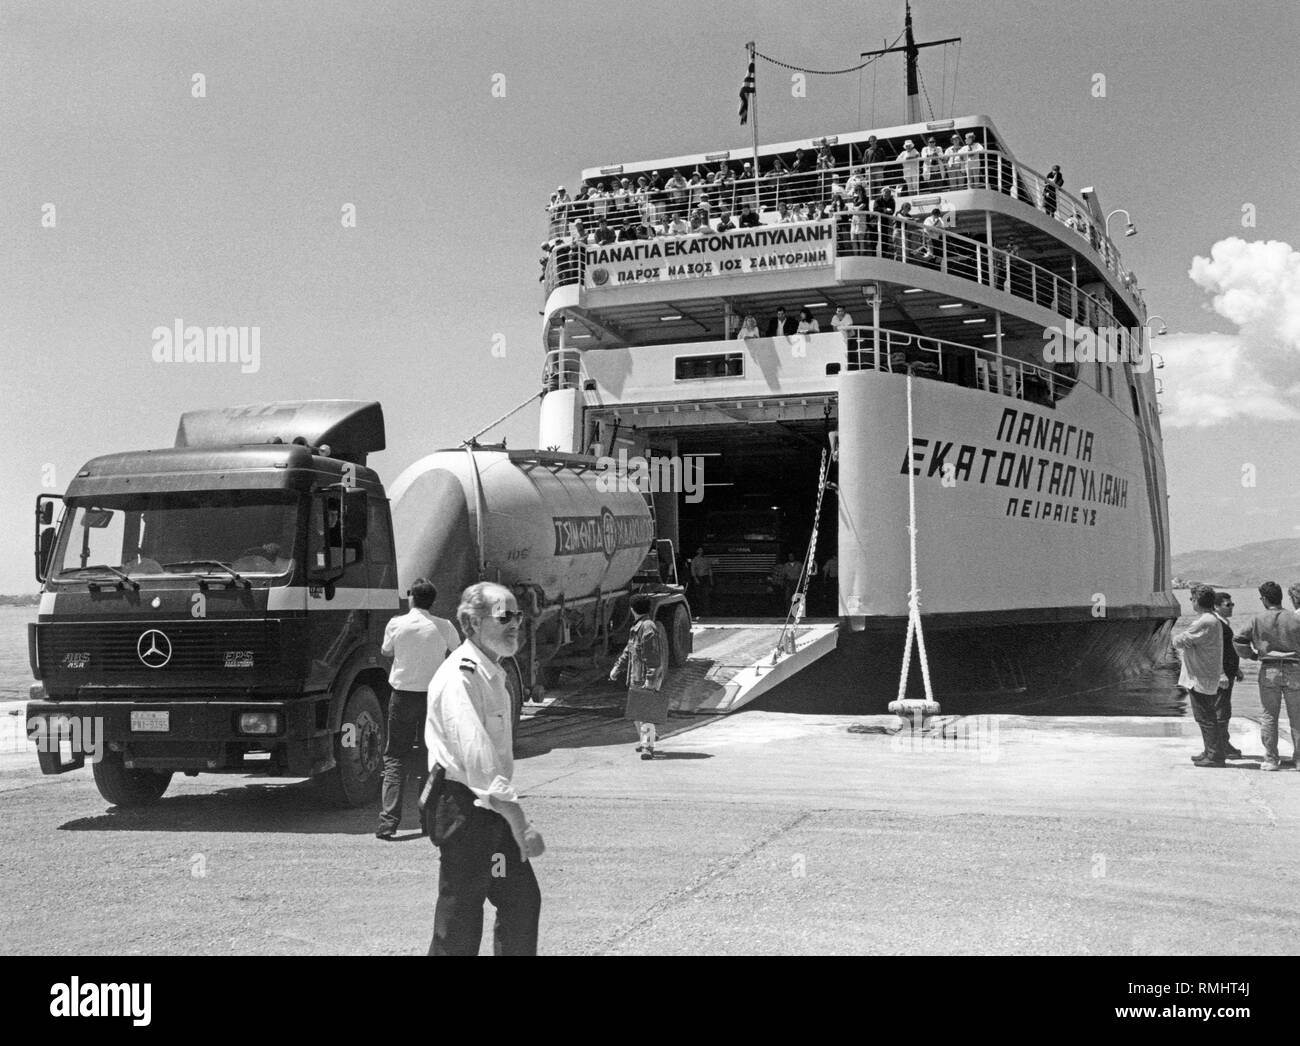 A truck leaves a RoRo ferry in the harbor of the Greek island of Naxos Stock Photo